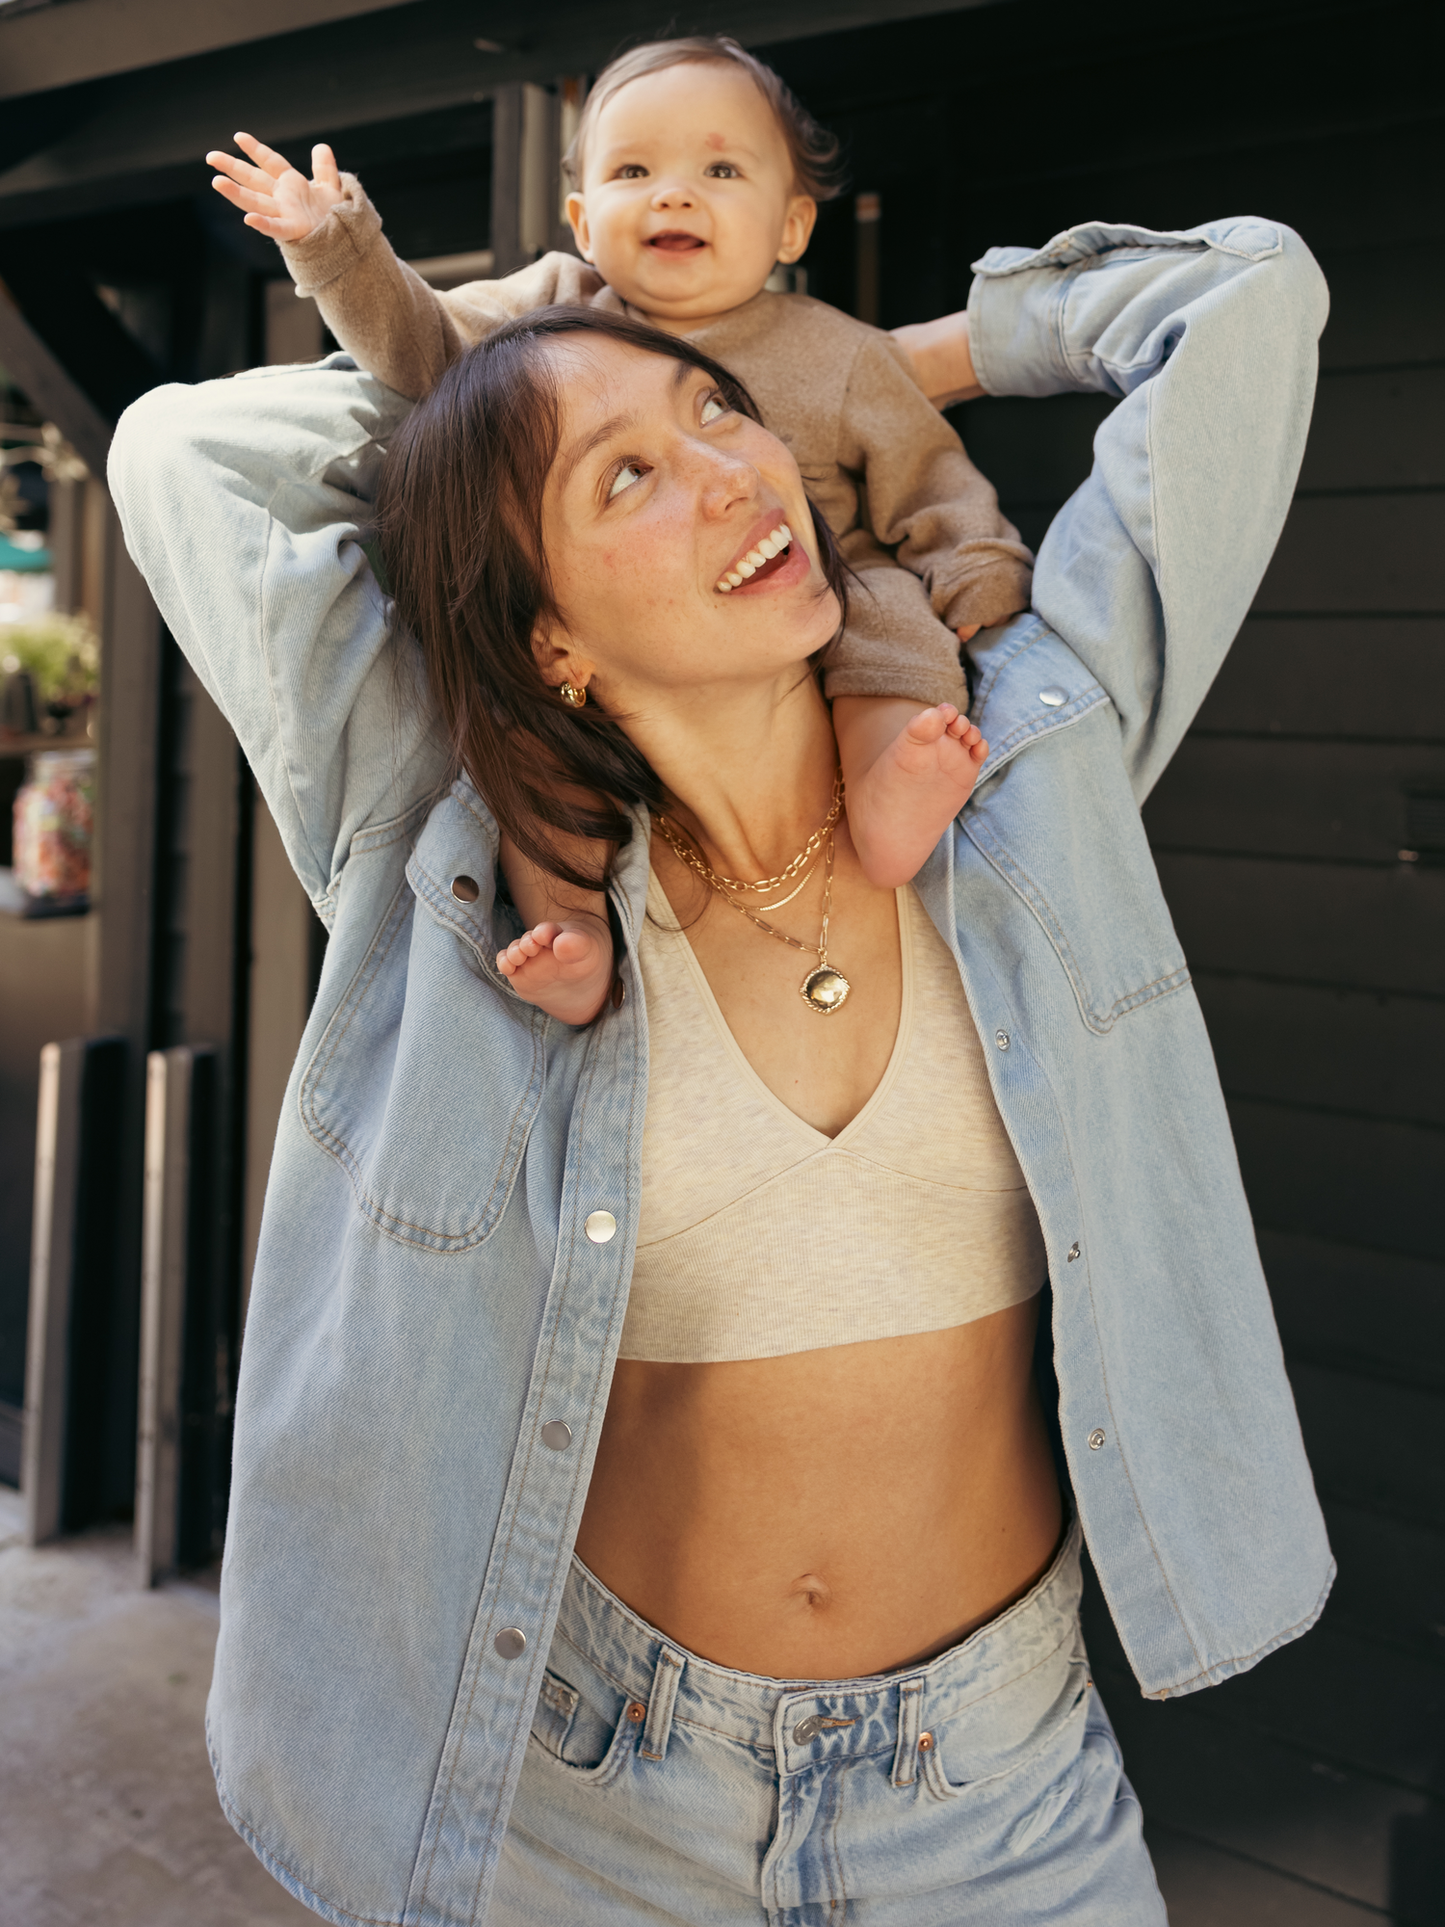 Model wearing the Plunge Neckline Maternity & Nursing Bra in Oatmeal Heather styled with a denim shirt. Carrying her baby on her shoulders. 